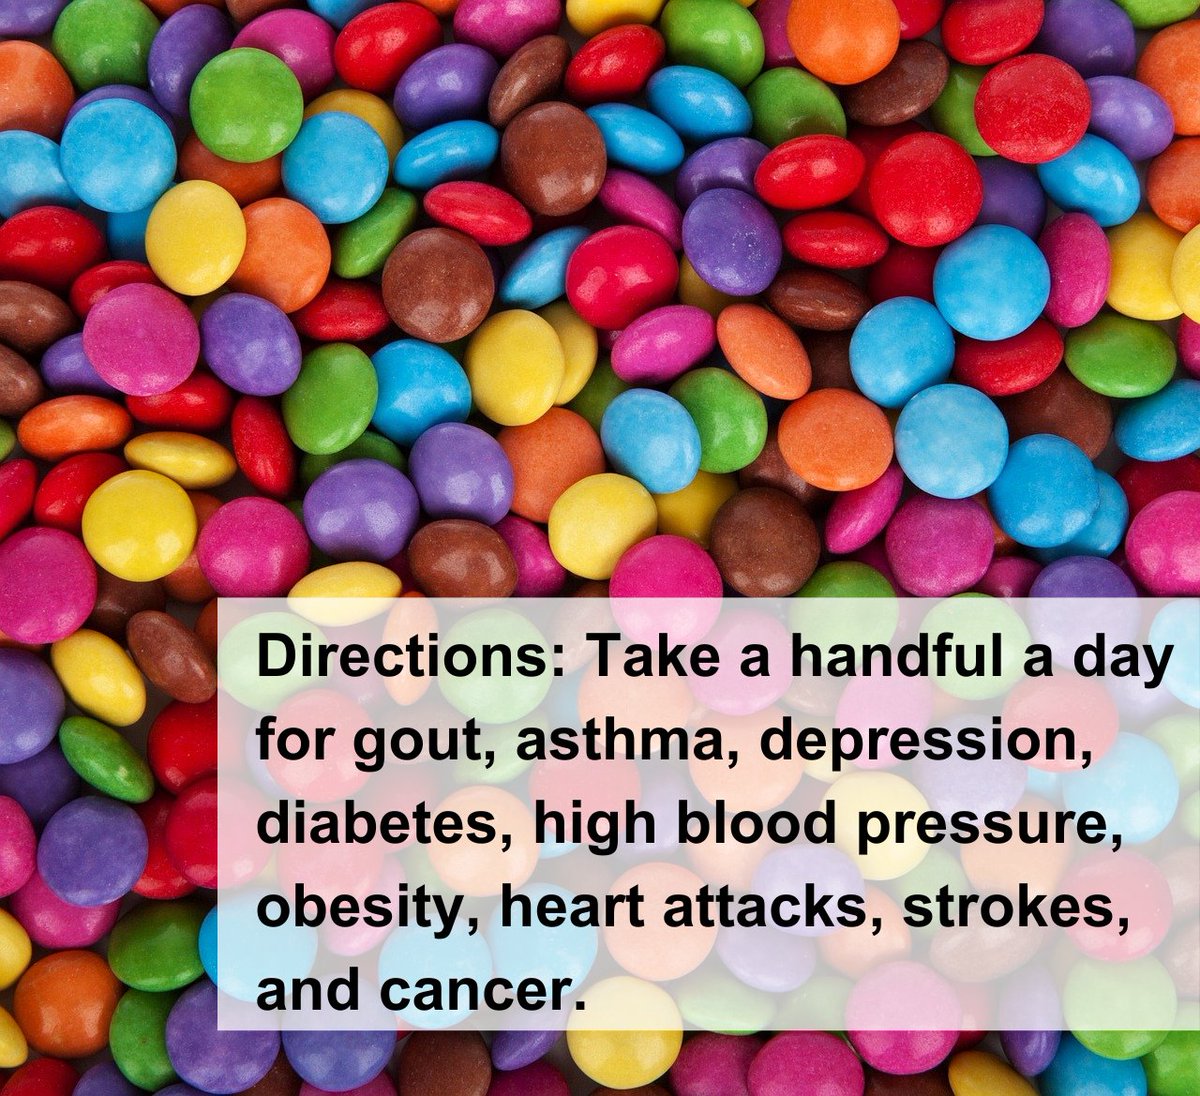 Consuming excessive amounts of sugar has been linked to a heightened risk of 45 different disease states, such as gout, asthma, diabetes, depression, high blood pressure, obesity, heart attacks, strokes, and cancer. Source: Daily Health Fact, Epoch Health #sugarfree #diabetes…